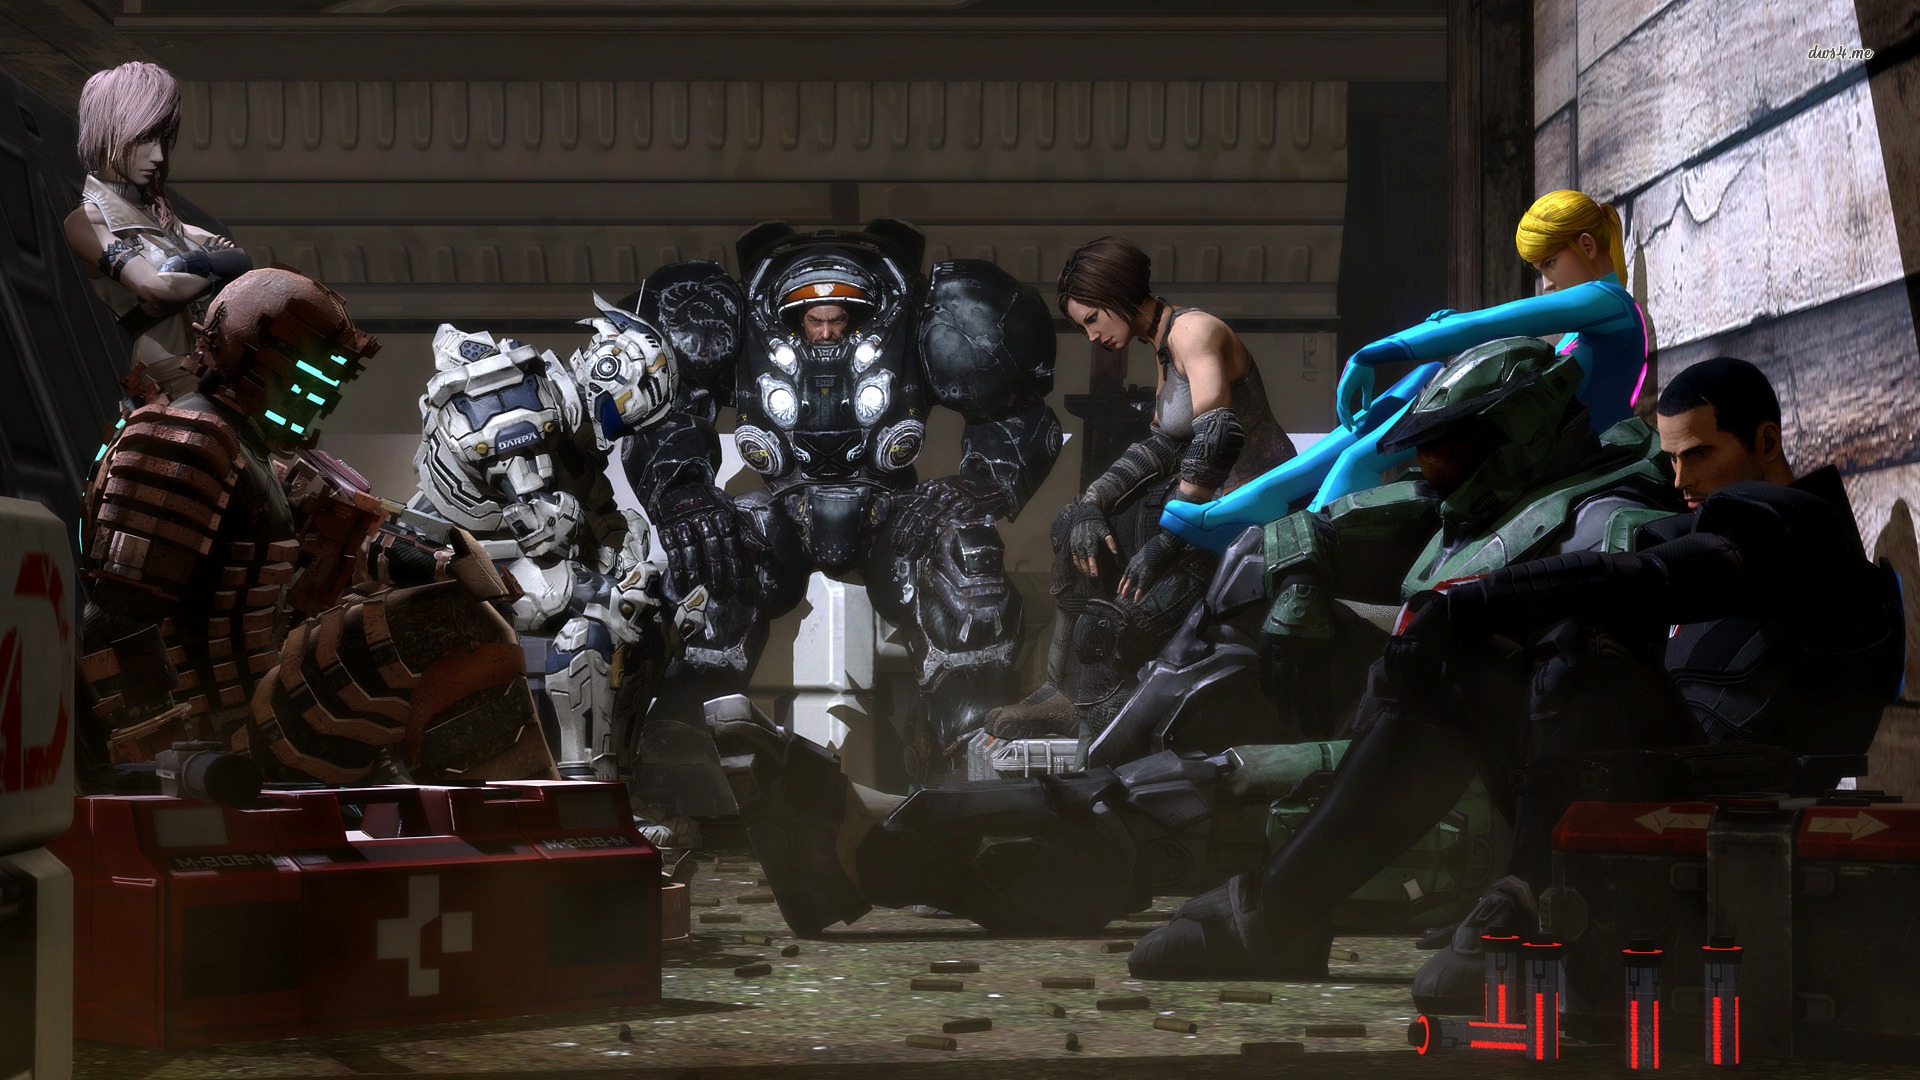 General 1920x1080 video games fan art Mass Effect collage bodysuit Dead Space Halo (game) Samus Aran Metroid Jim Raynor Commander Shepard digital art artwork CGI Video Game Heroes video game art Zero Suit Samus Isaac Clarke video game crossover Master Chief (Halo) video game characters